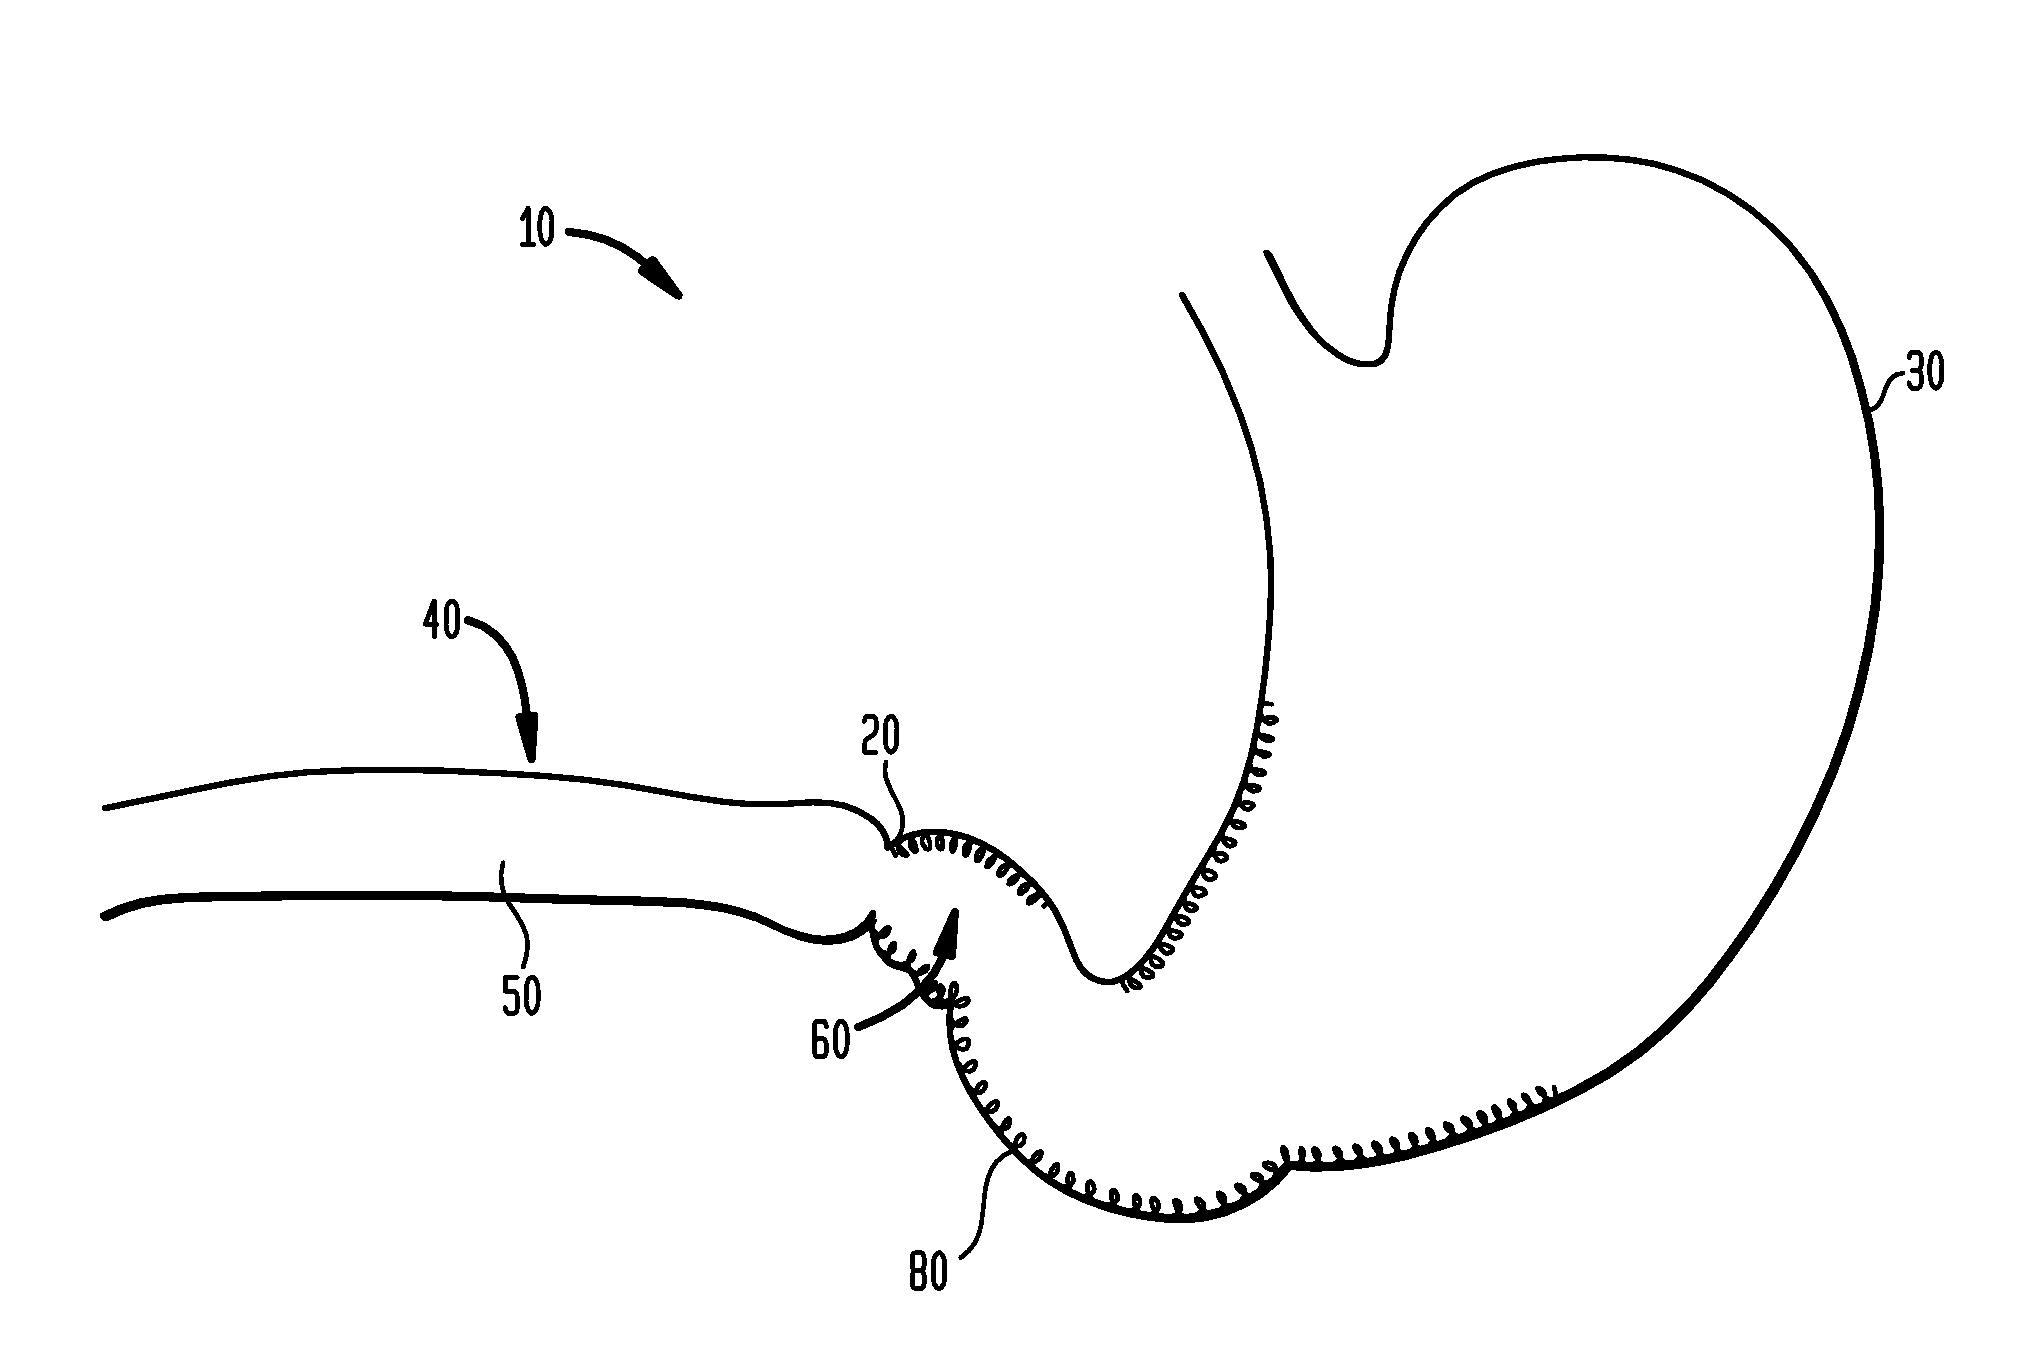 Systems and Methods for Treatment of Obesity and Type 2 Diabetes